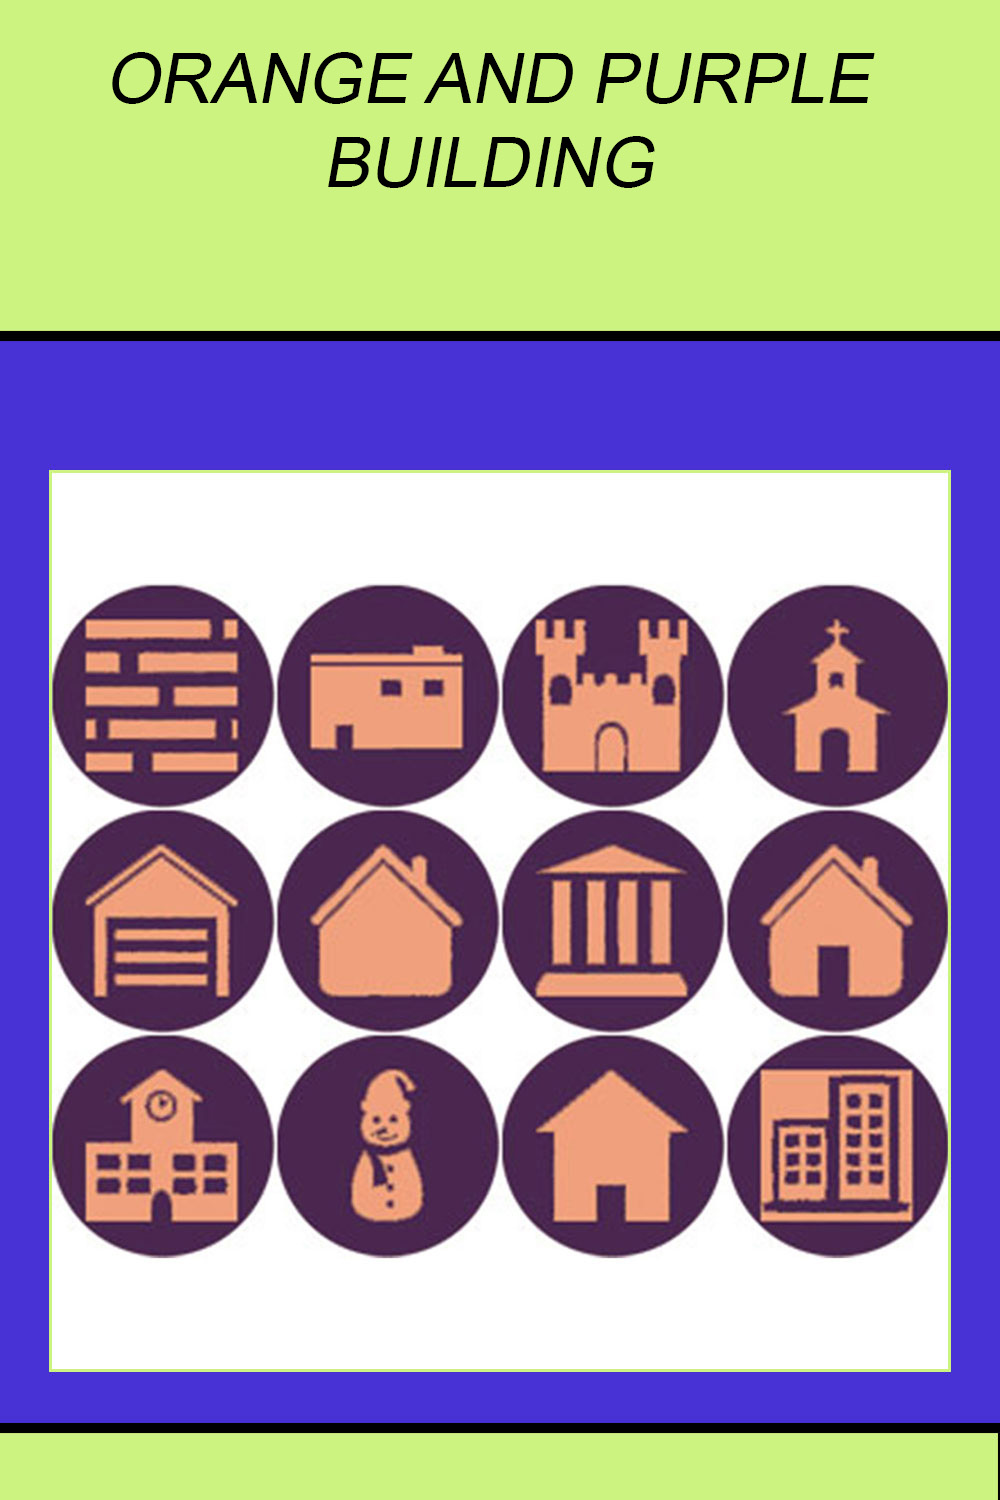 ORANGE AND PURPLE BUILDING ROUND ICONS pinterest preview image.